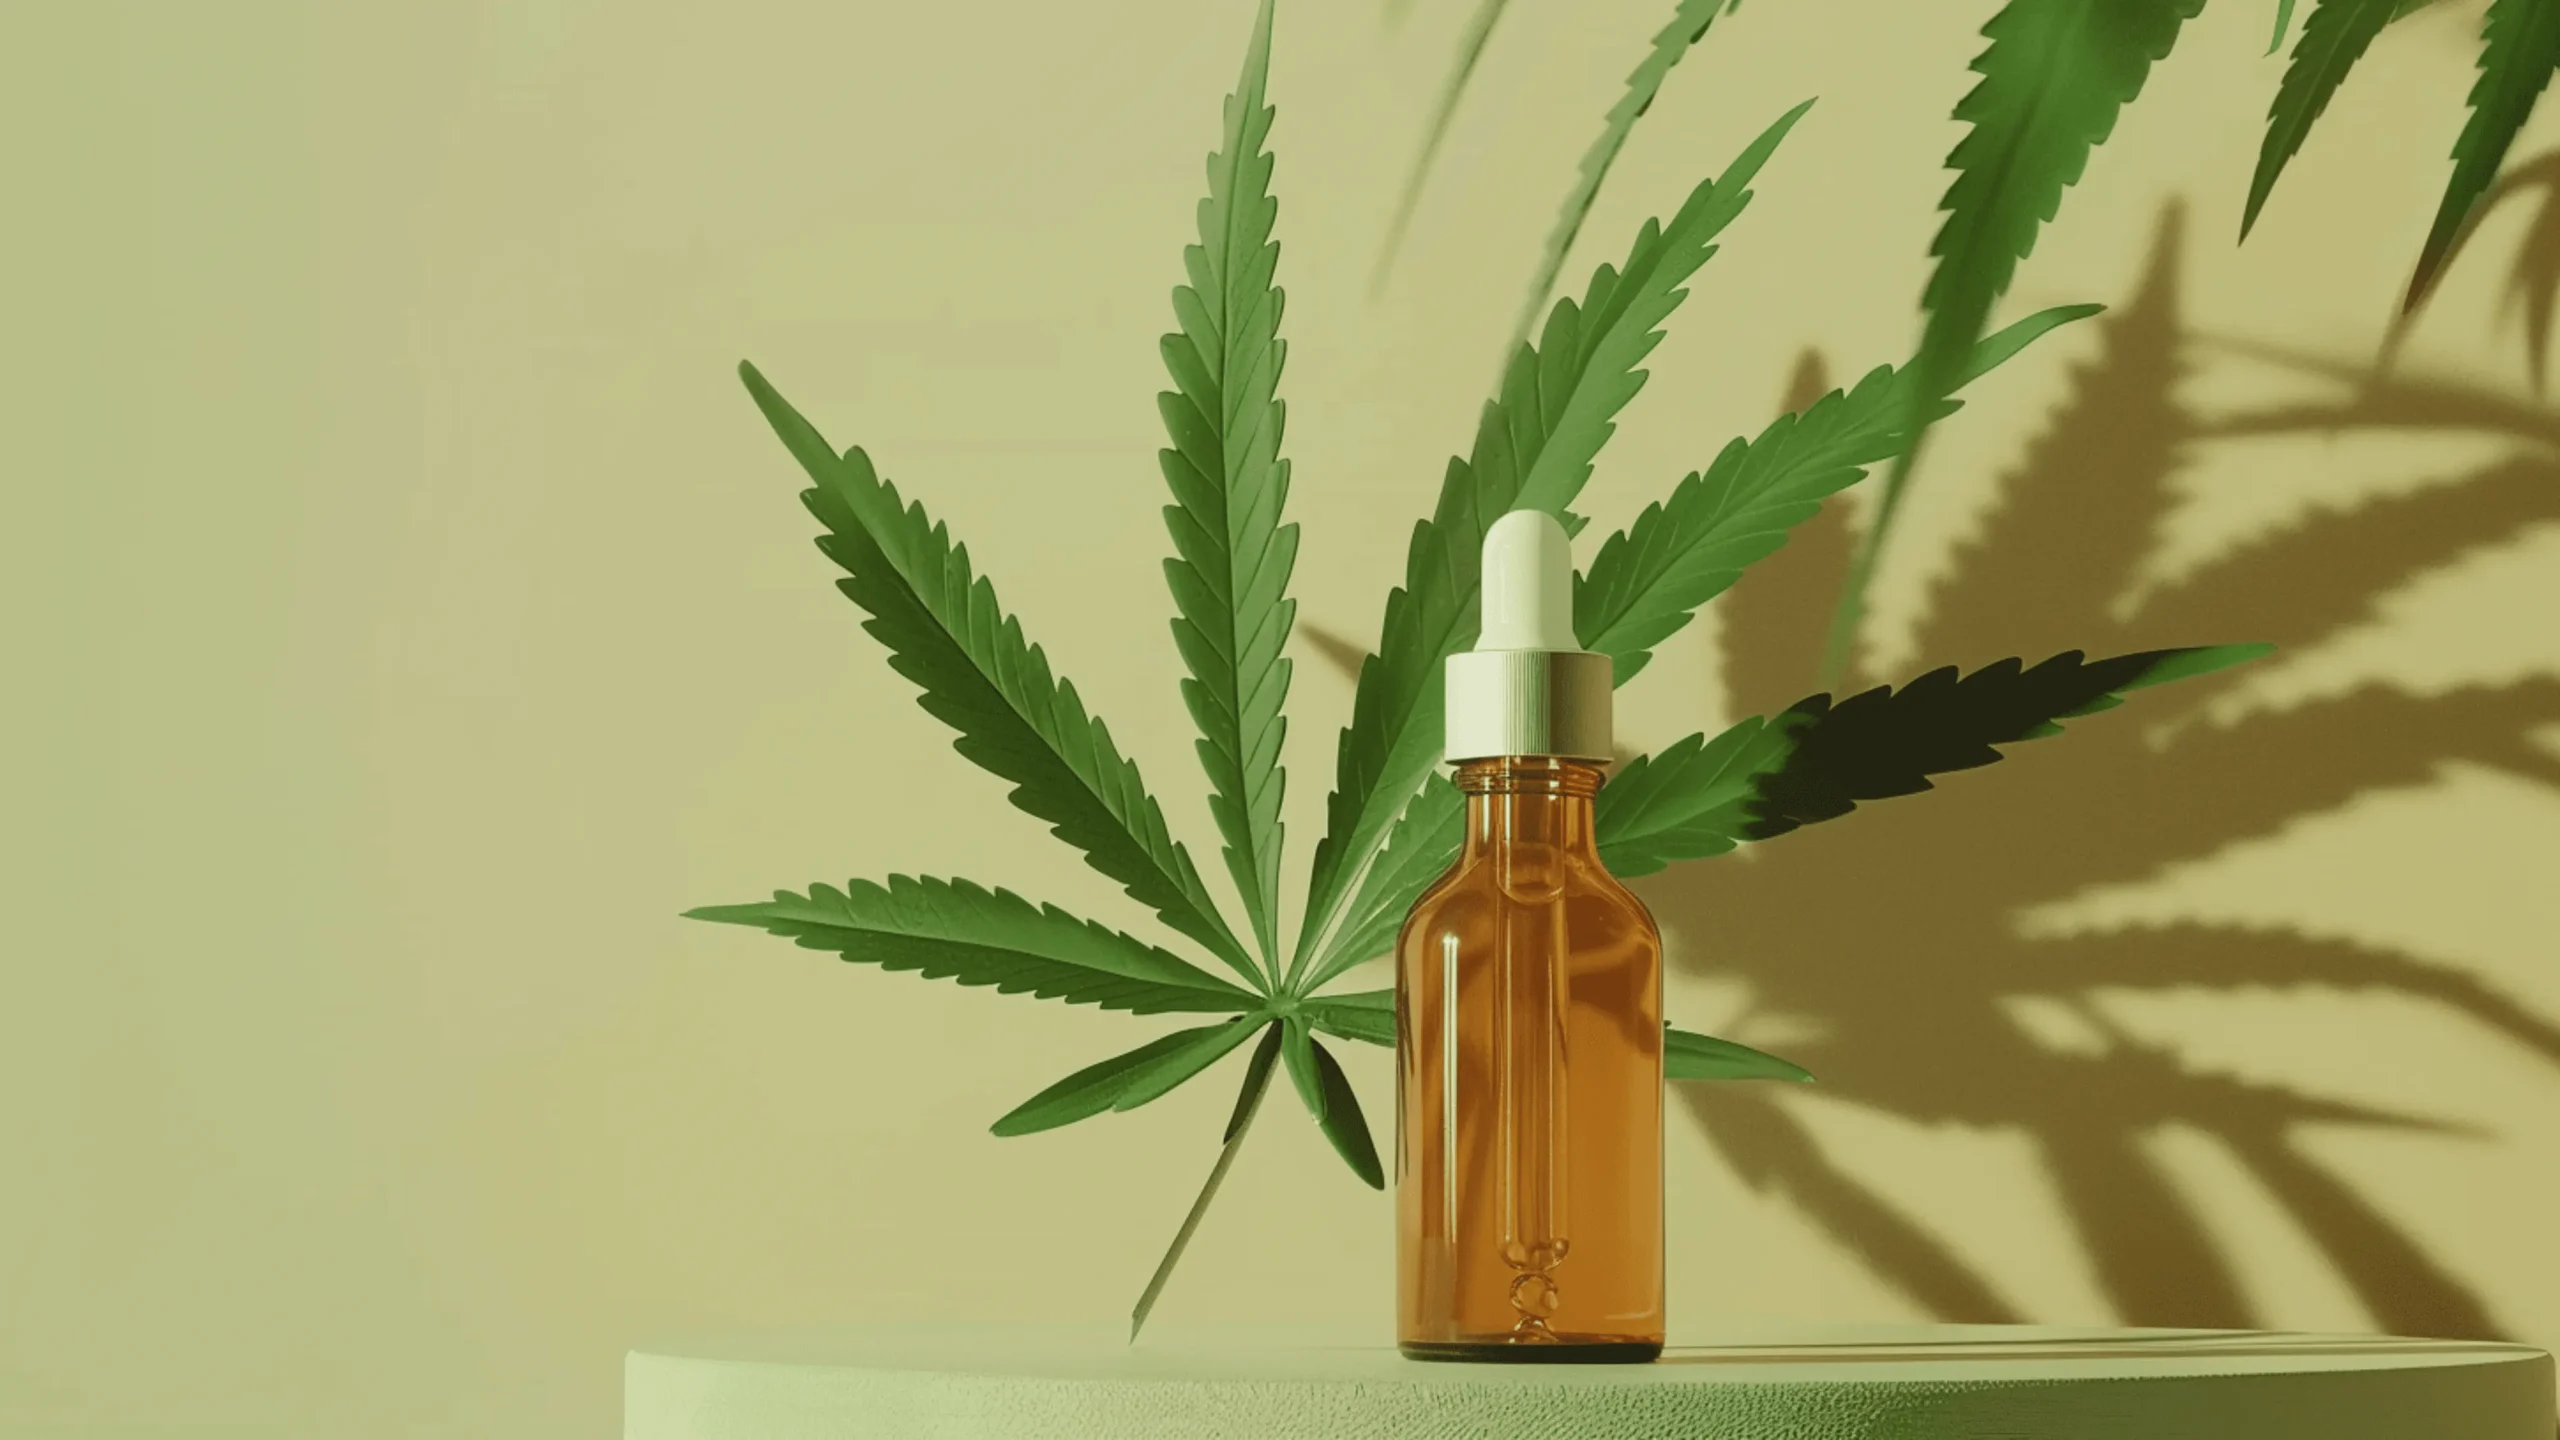 Benefits of CBD oil for anxiety and stress